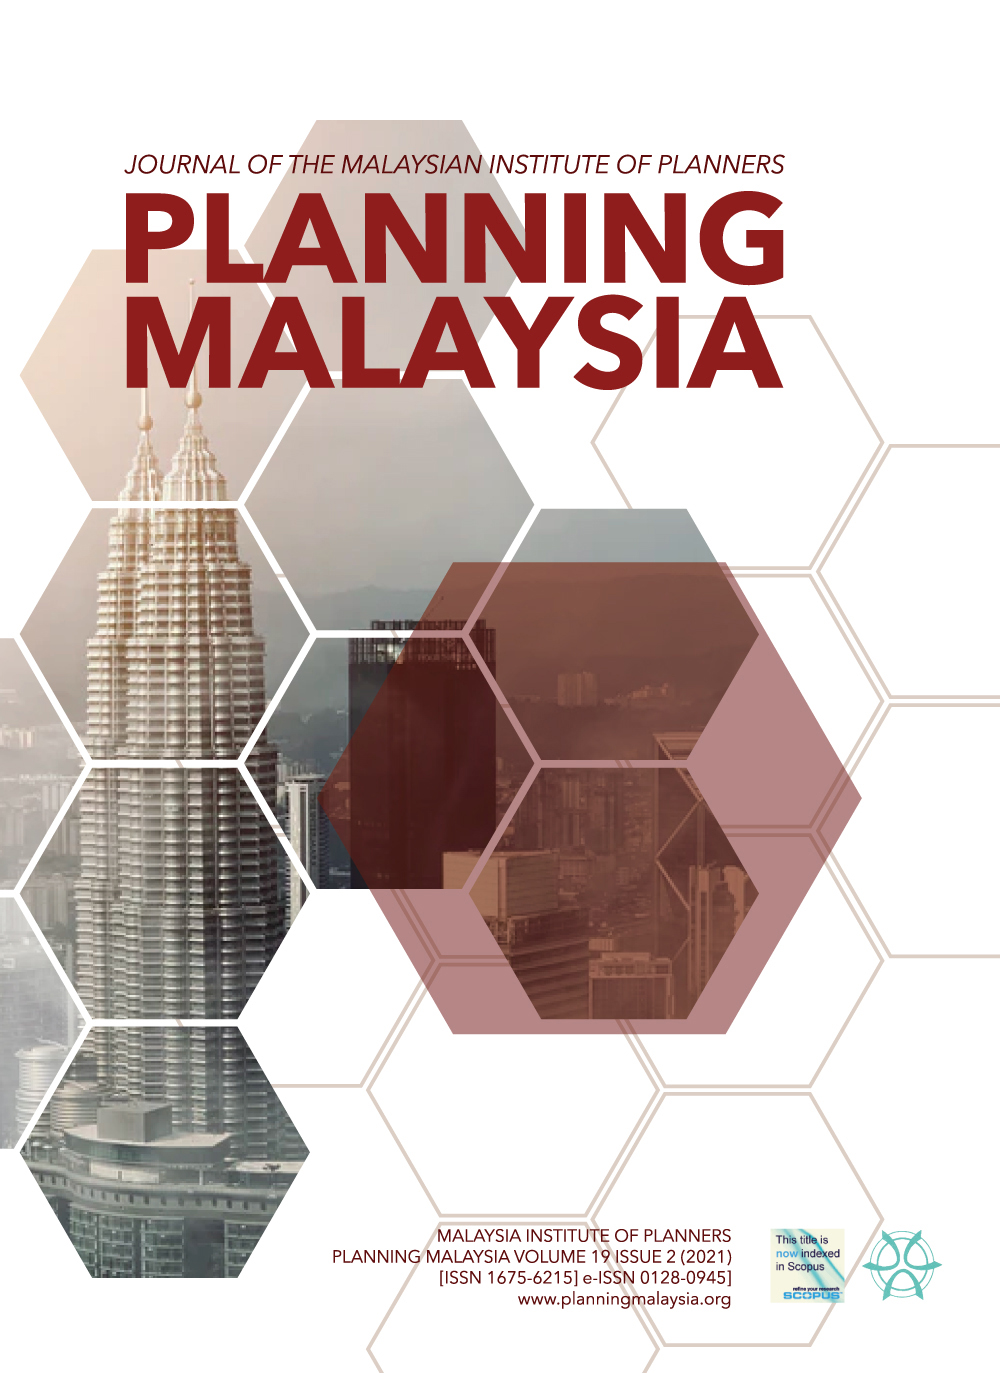 					View Vol. 19 (2021): PLANNING MALAYSIA JOURNAL : Volume 19, Issue 2, 2021
				